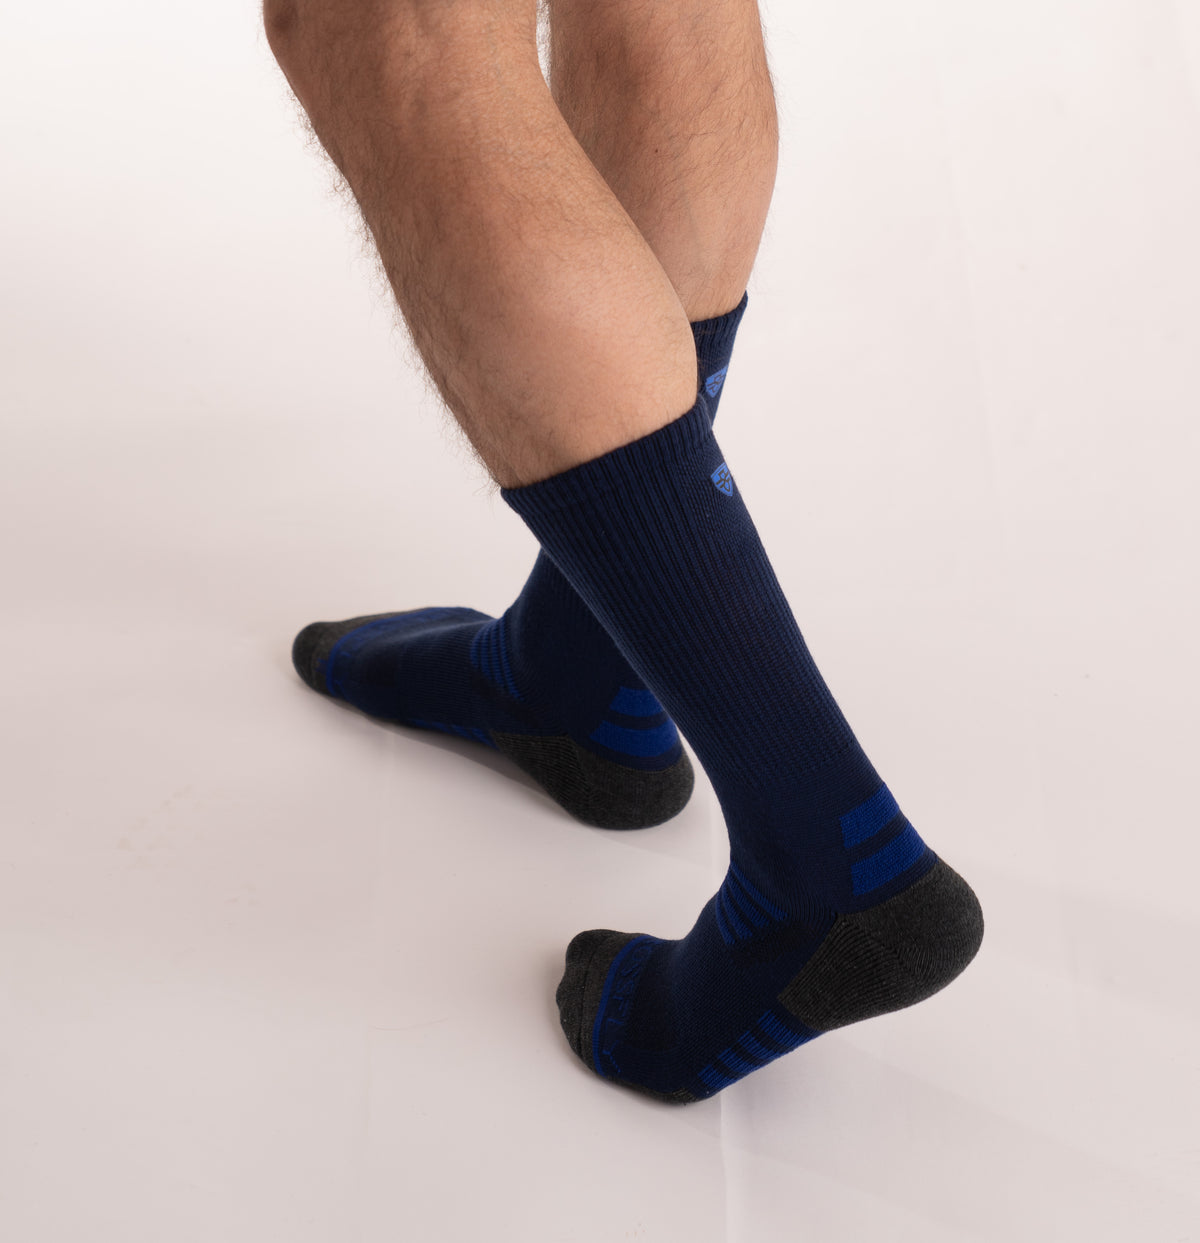 Crossfly men&#39;s Tempo Crew Socks in navy / royal from the Performance series, featuring AirBeams and 180 Hold.